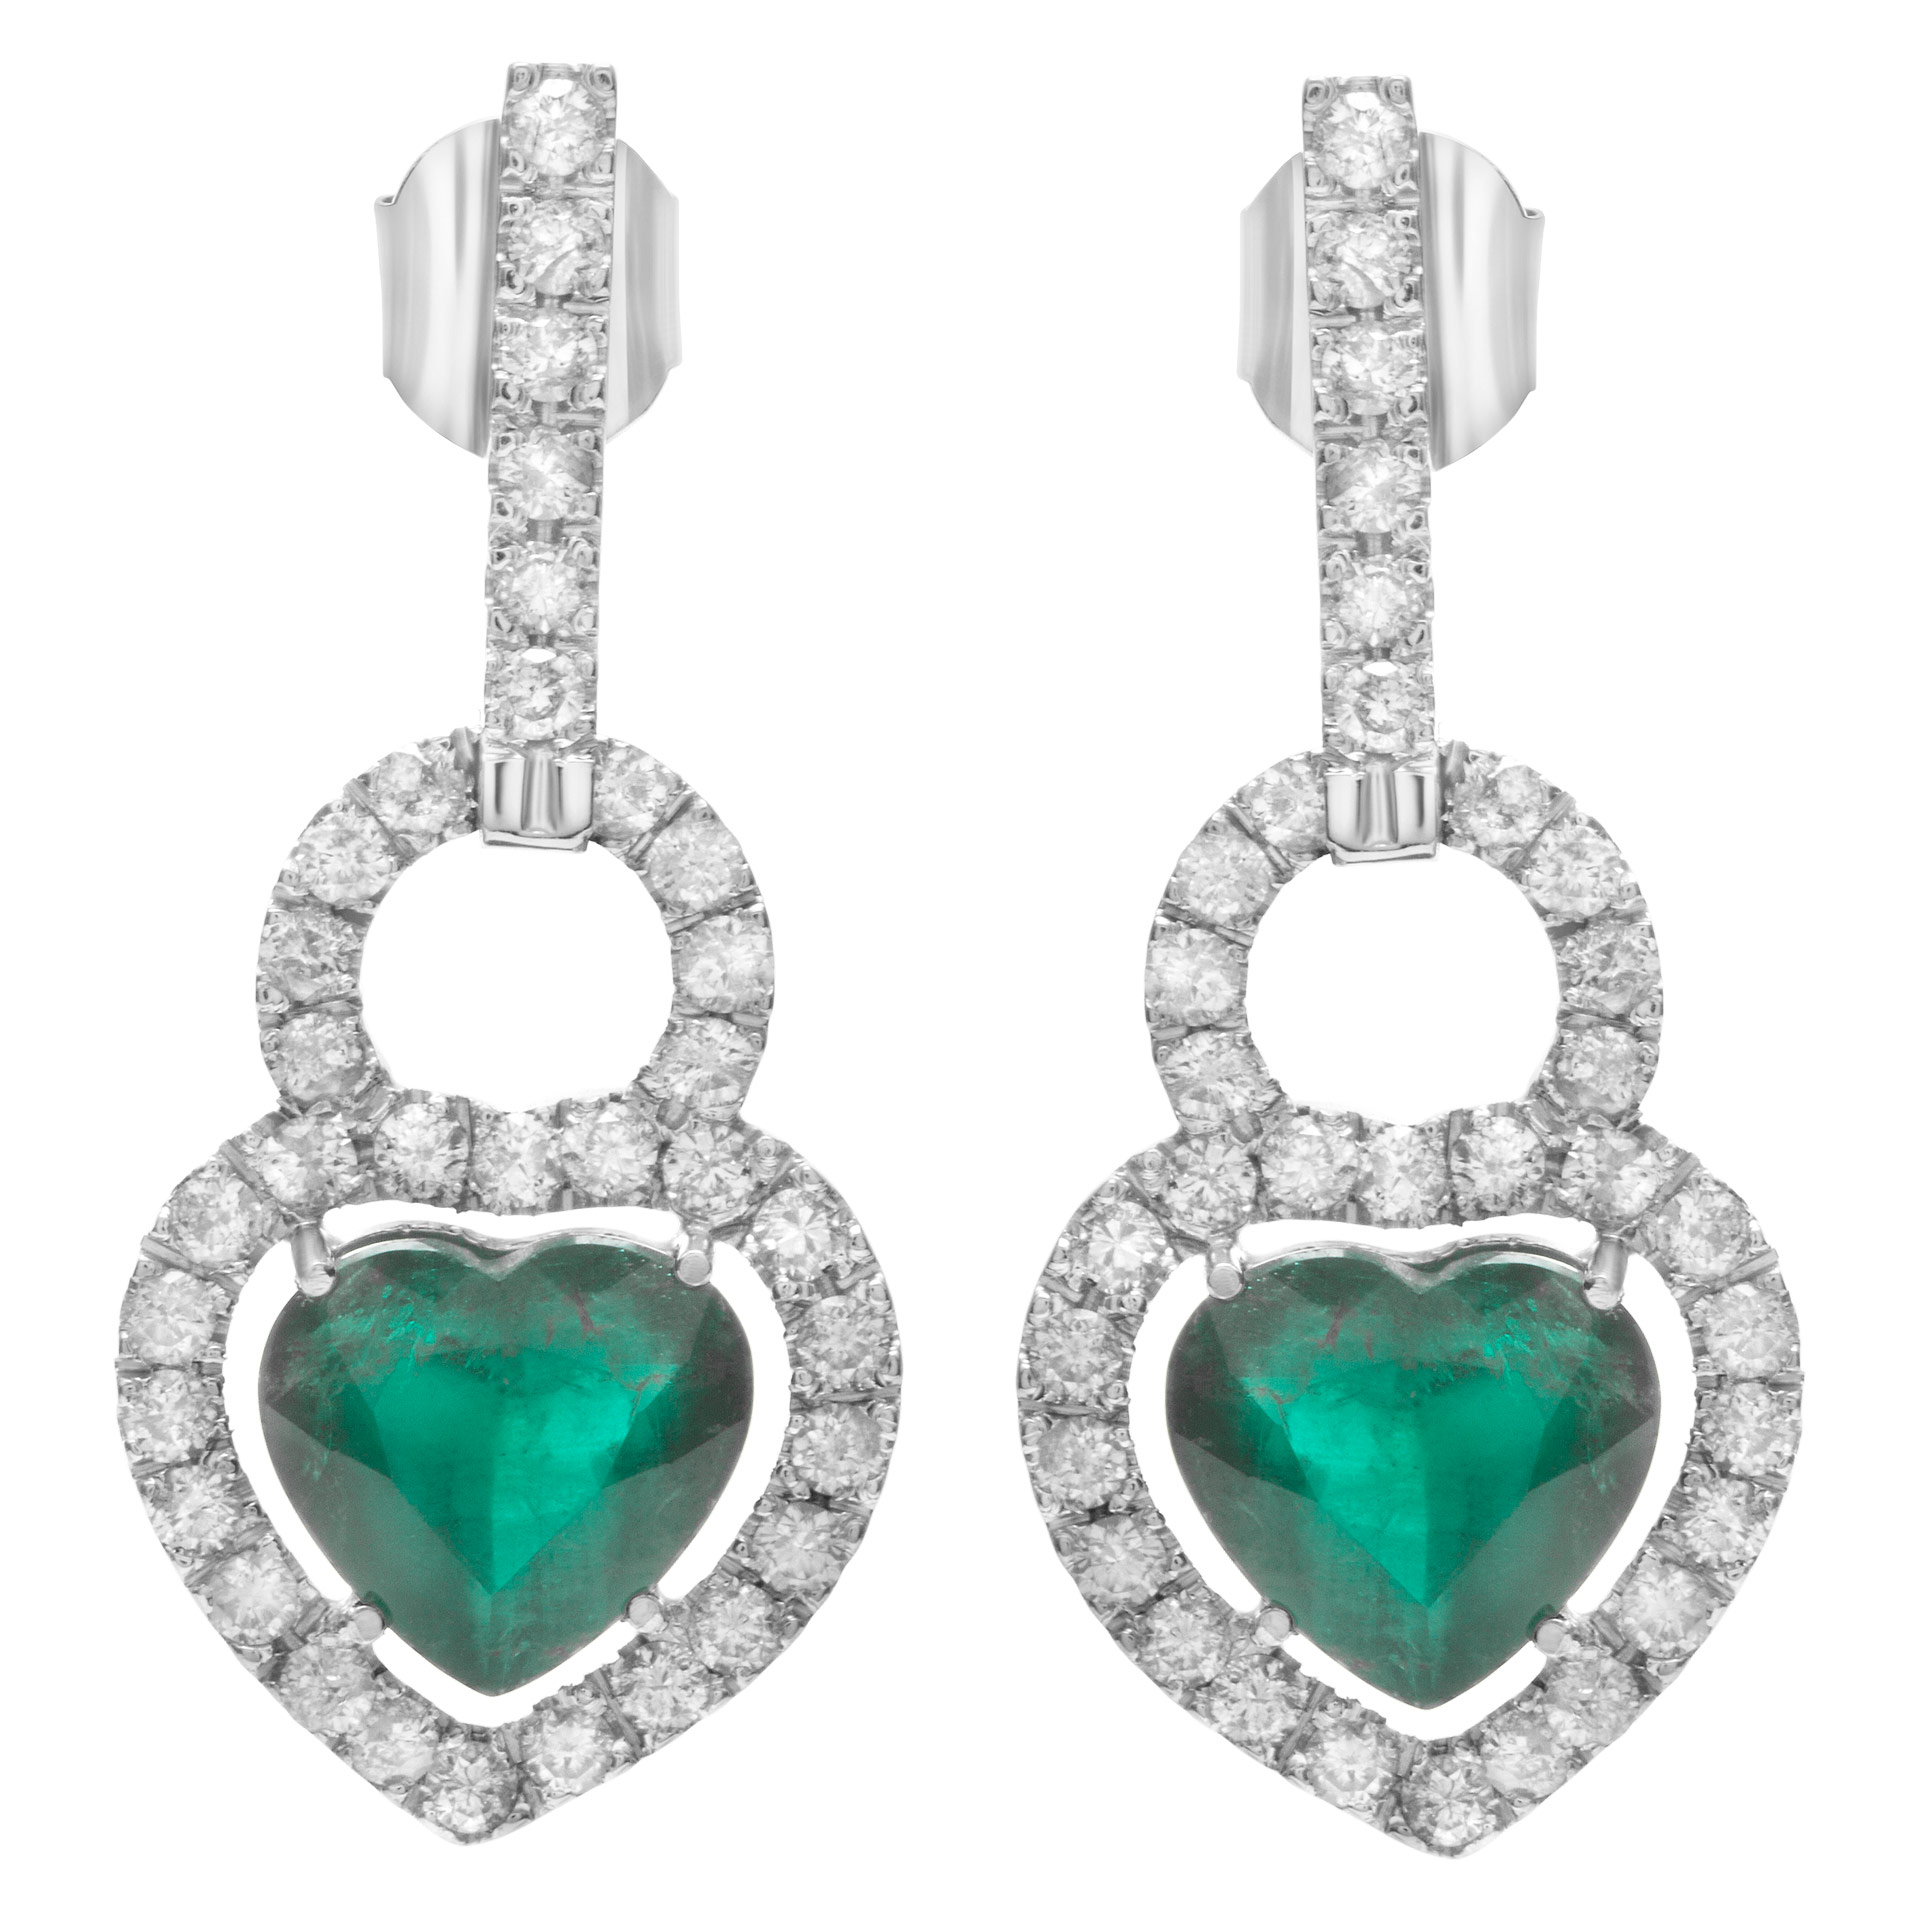 Heart shape emerald earrings with 2.80 cts in diamonds set in 18k white gold image 1